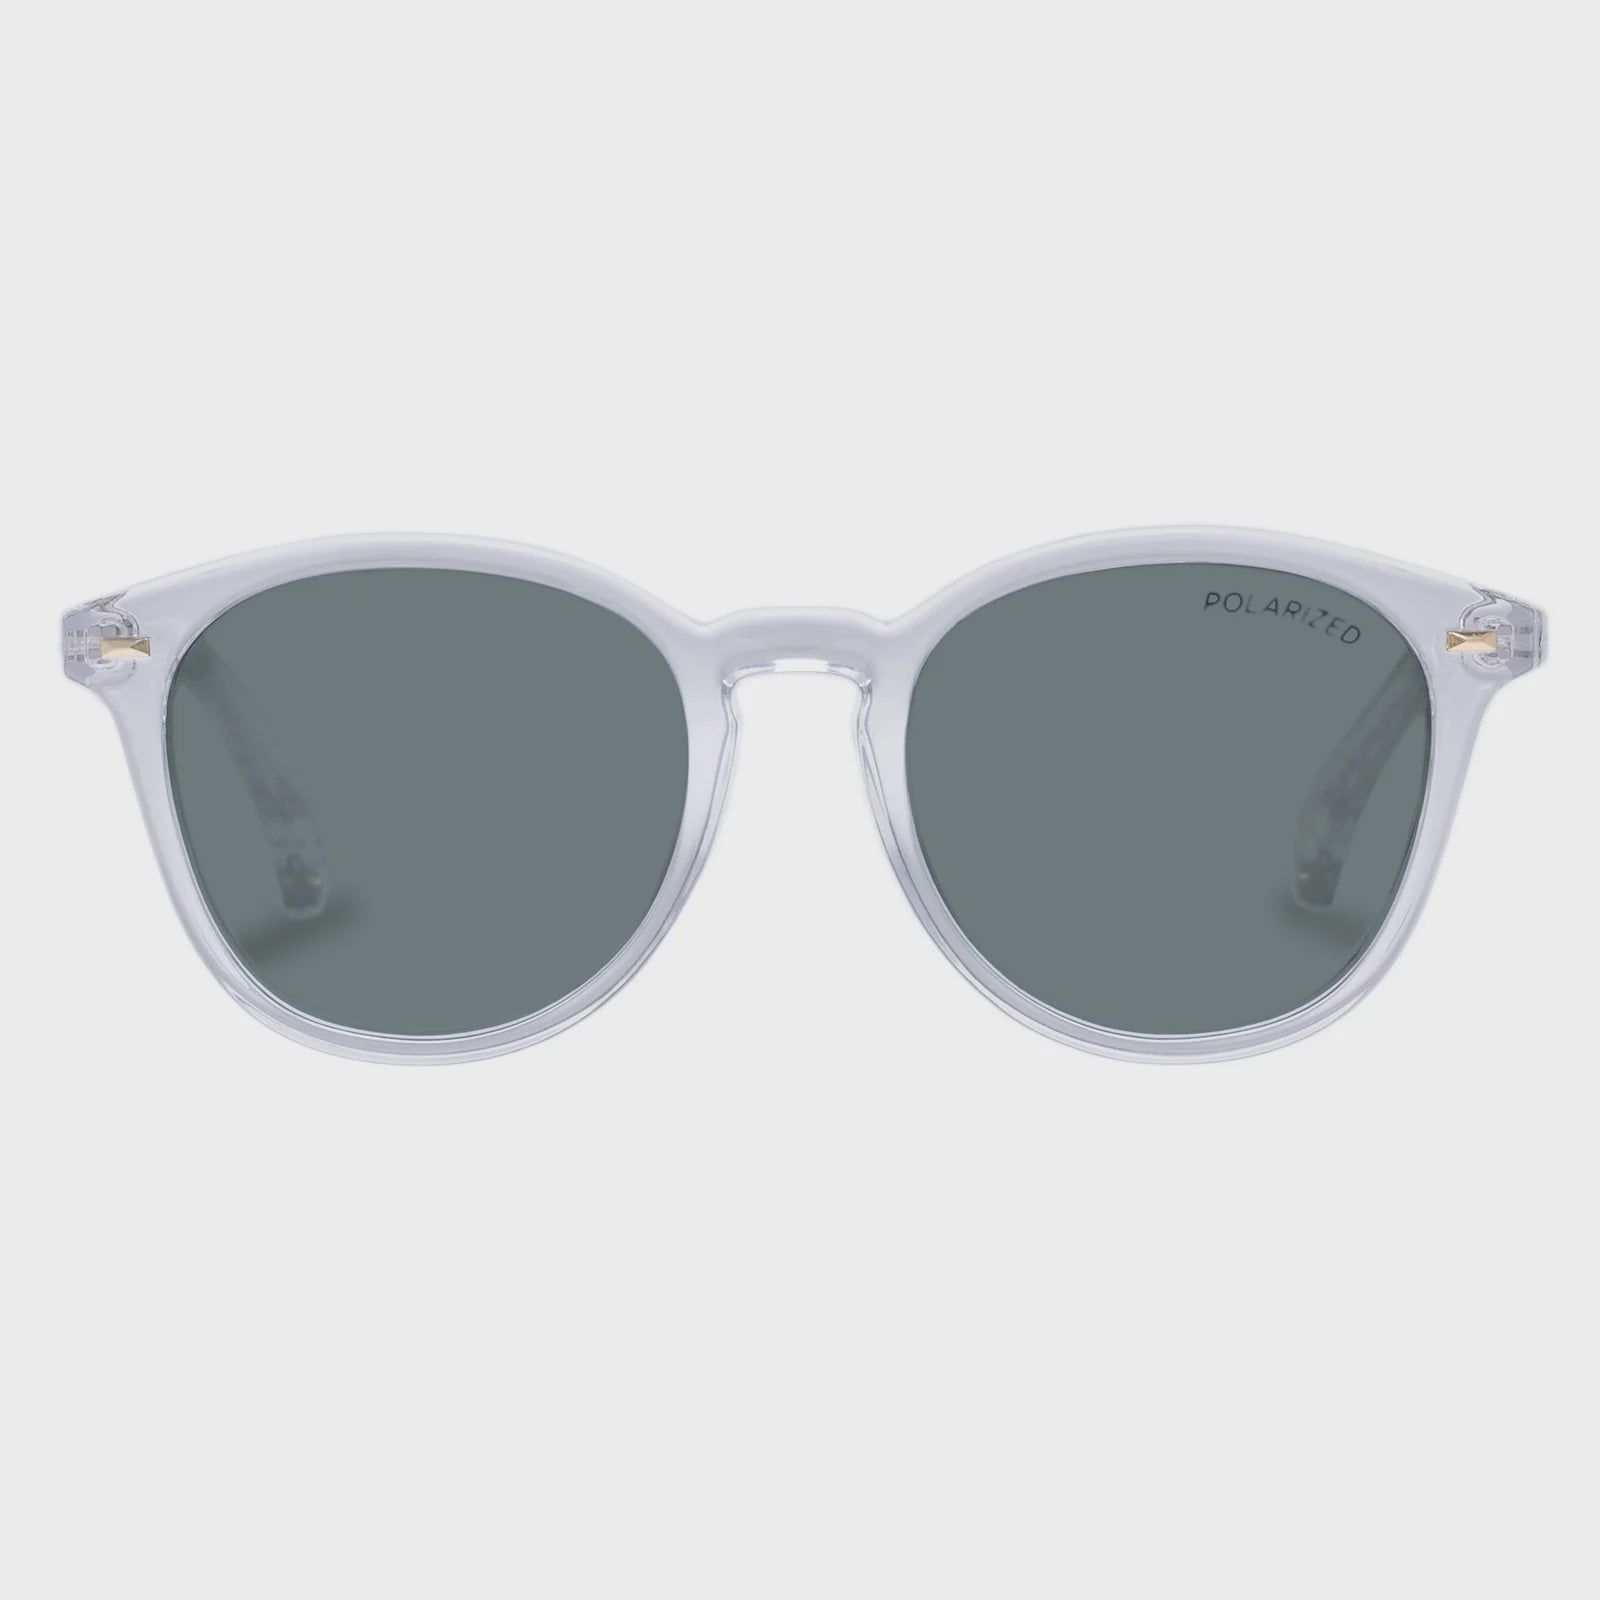 LE SPECS - BANDWAGON SUNGLASSES IN CRYSTAL CLEAR - POLARIZED